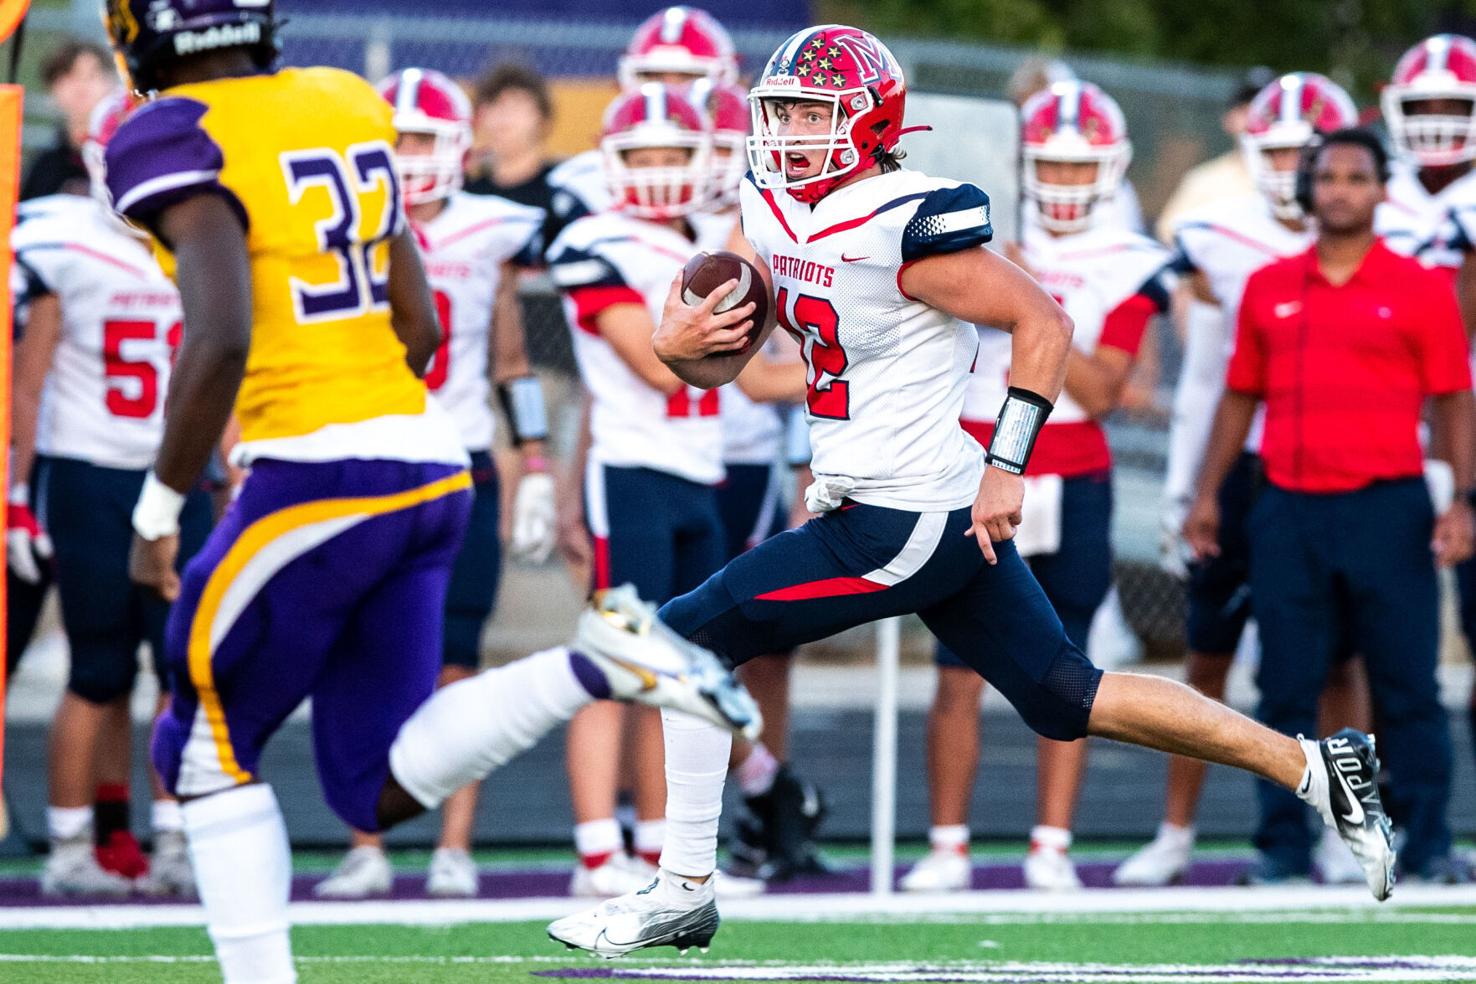 The Journal Star's 2021 SuperState and allstate football teams